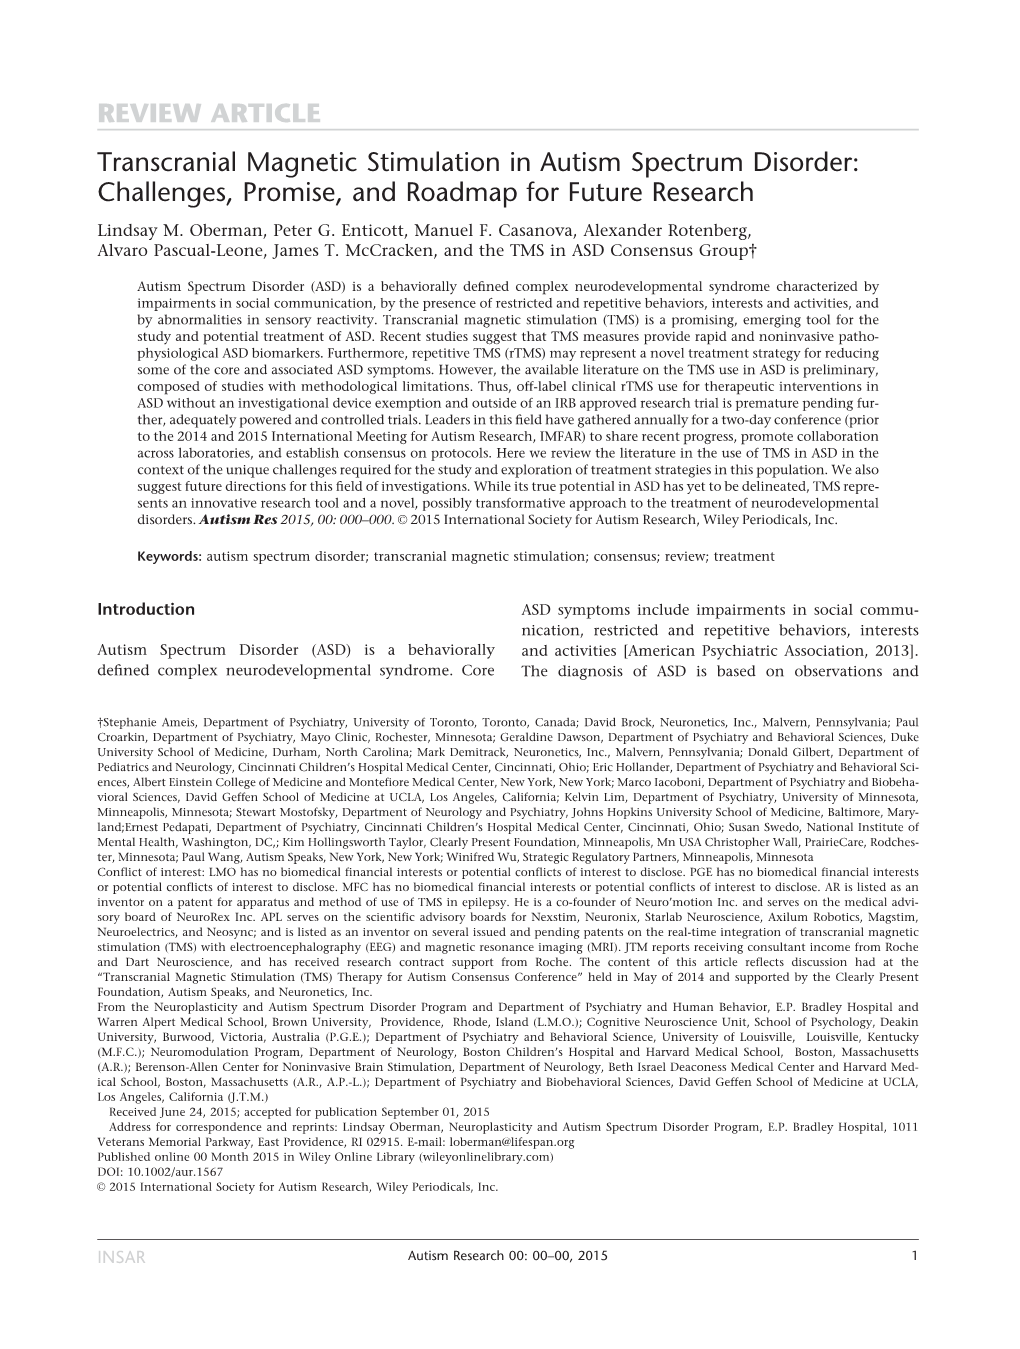 Transcranial Magnetic Stimulation in Autism Spectrum Disorder: Challenges, Promise, and Roadmap for Future Research Lindsay M